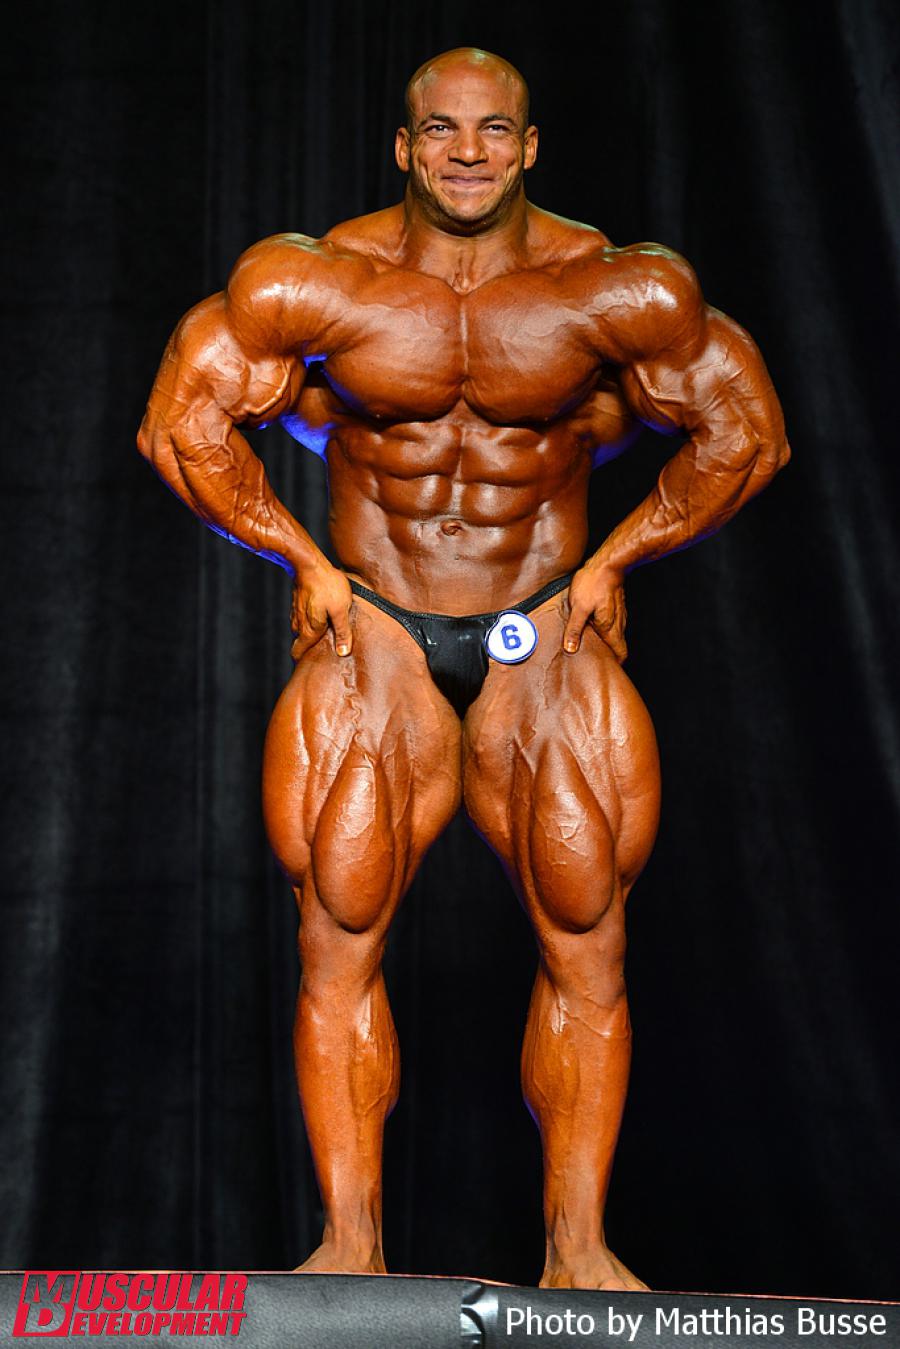 Where Will Big Ramy Really Stand at This Year's Mr. Olympia